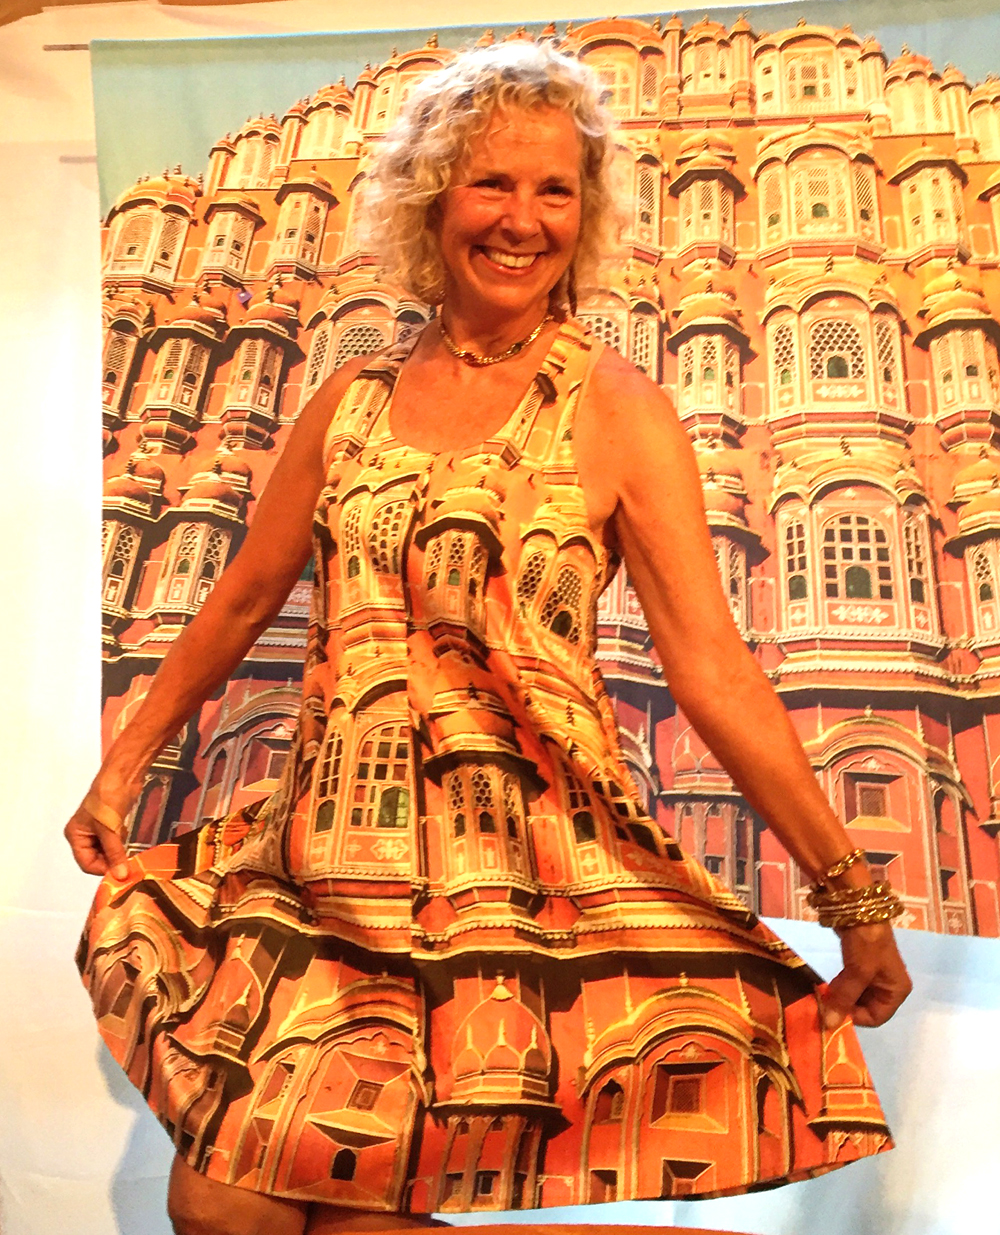 Dress designed by Mary Anne Erickson and made from two of her photographs of Hawa Mahal in Jaipur, India.